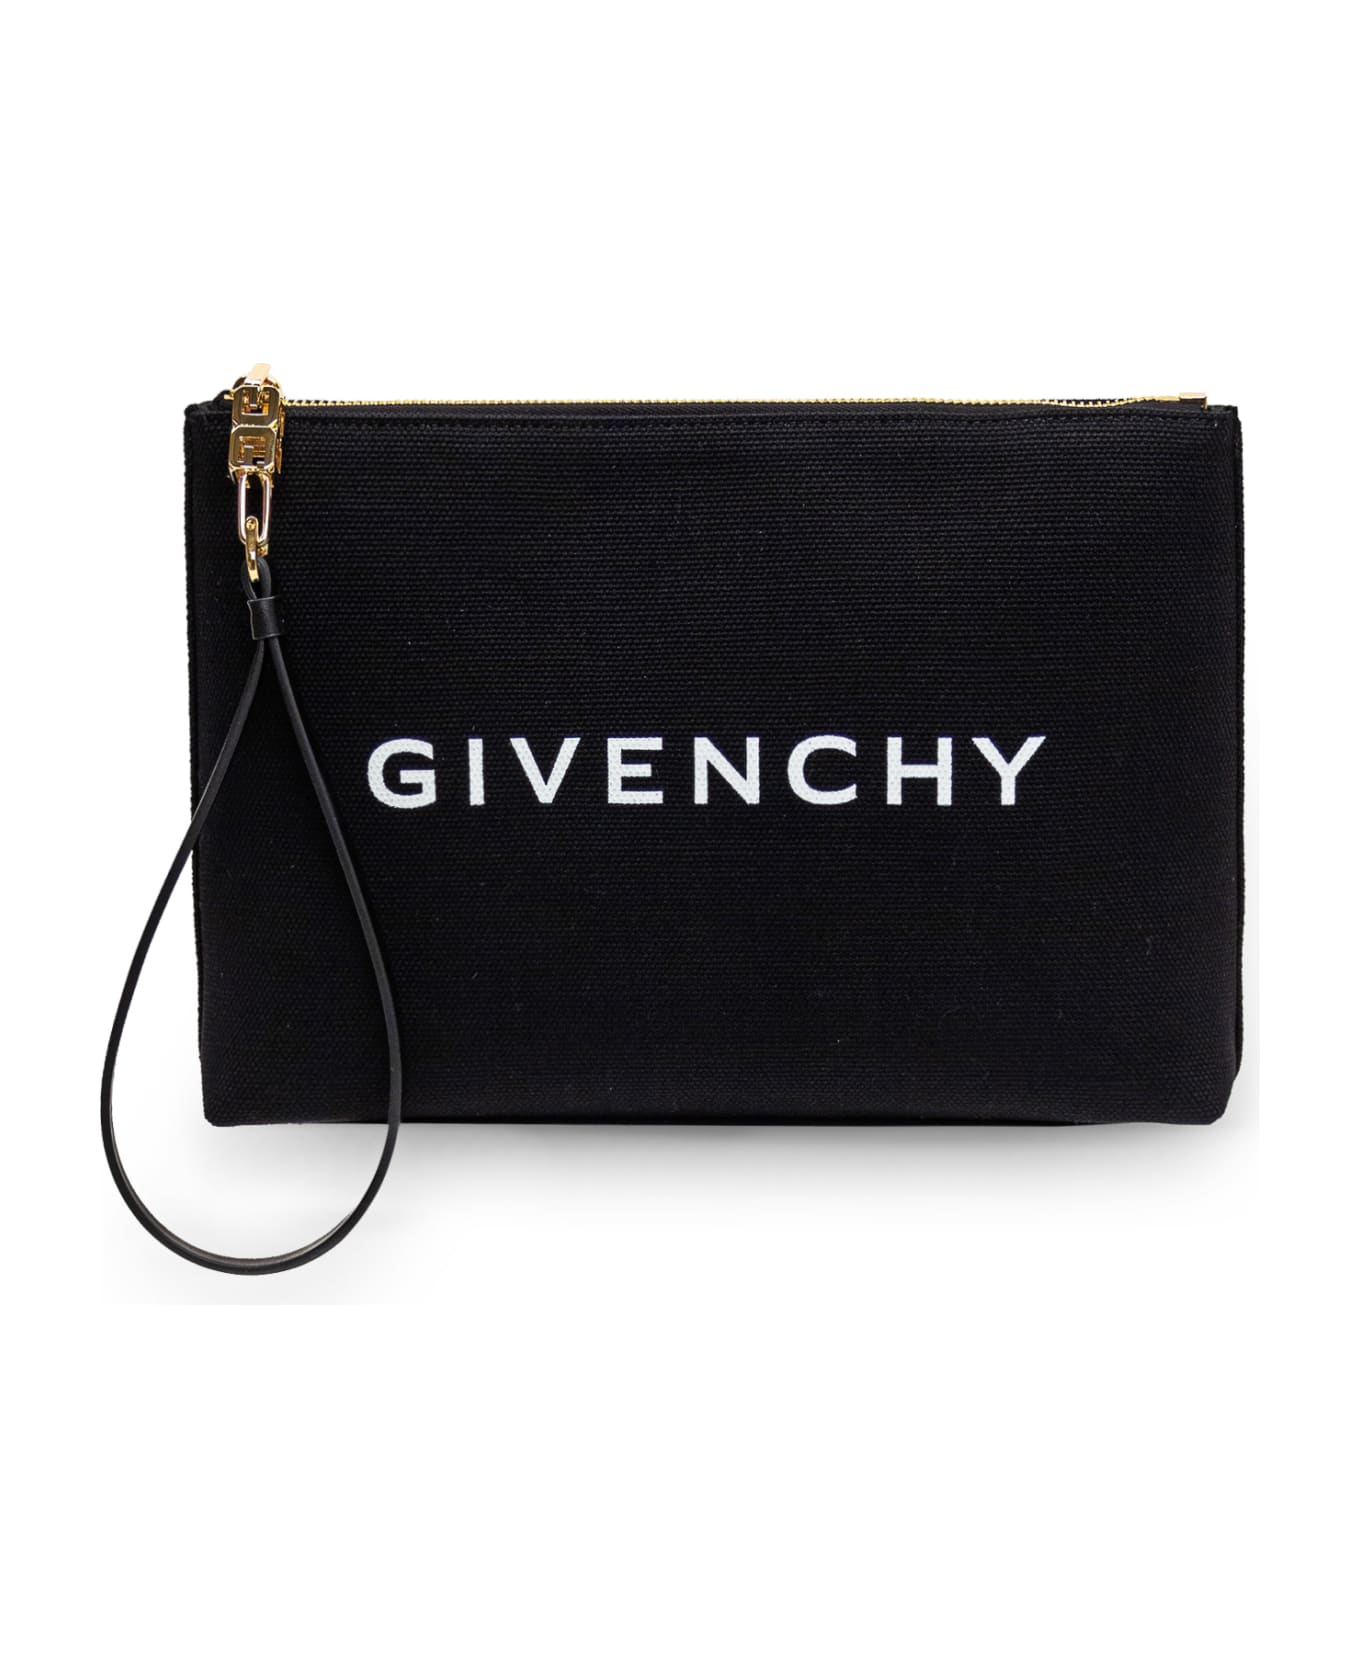 Givenchy Travel Pouch Clutch - Black クラッチバッグ